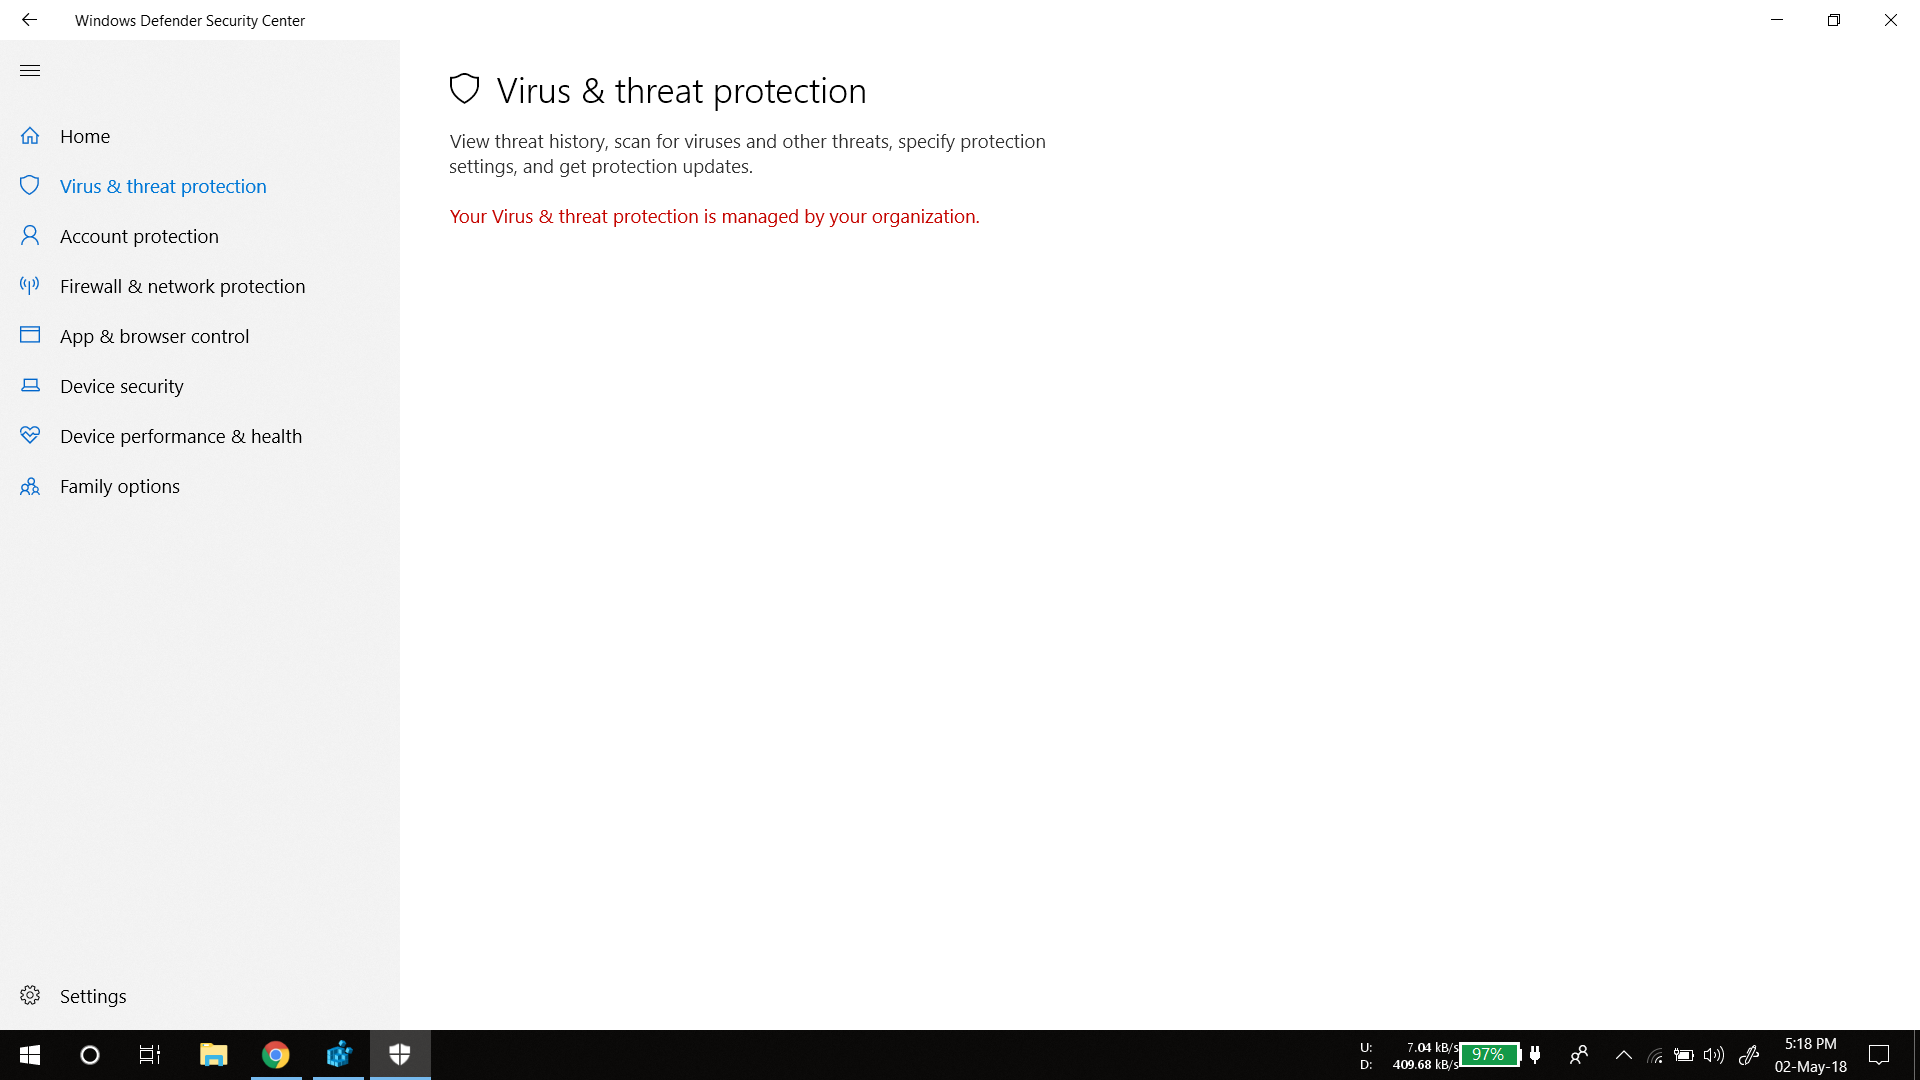 windows defender says my virus and threat protection is managed by my organization, how do... 6408d6ee-1c20-4c97-bf4e-3622cf2cee50?upload=true.png